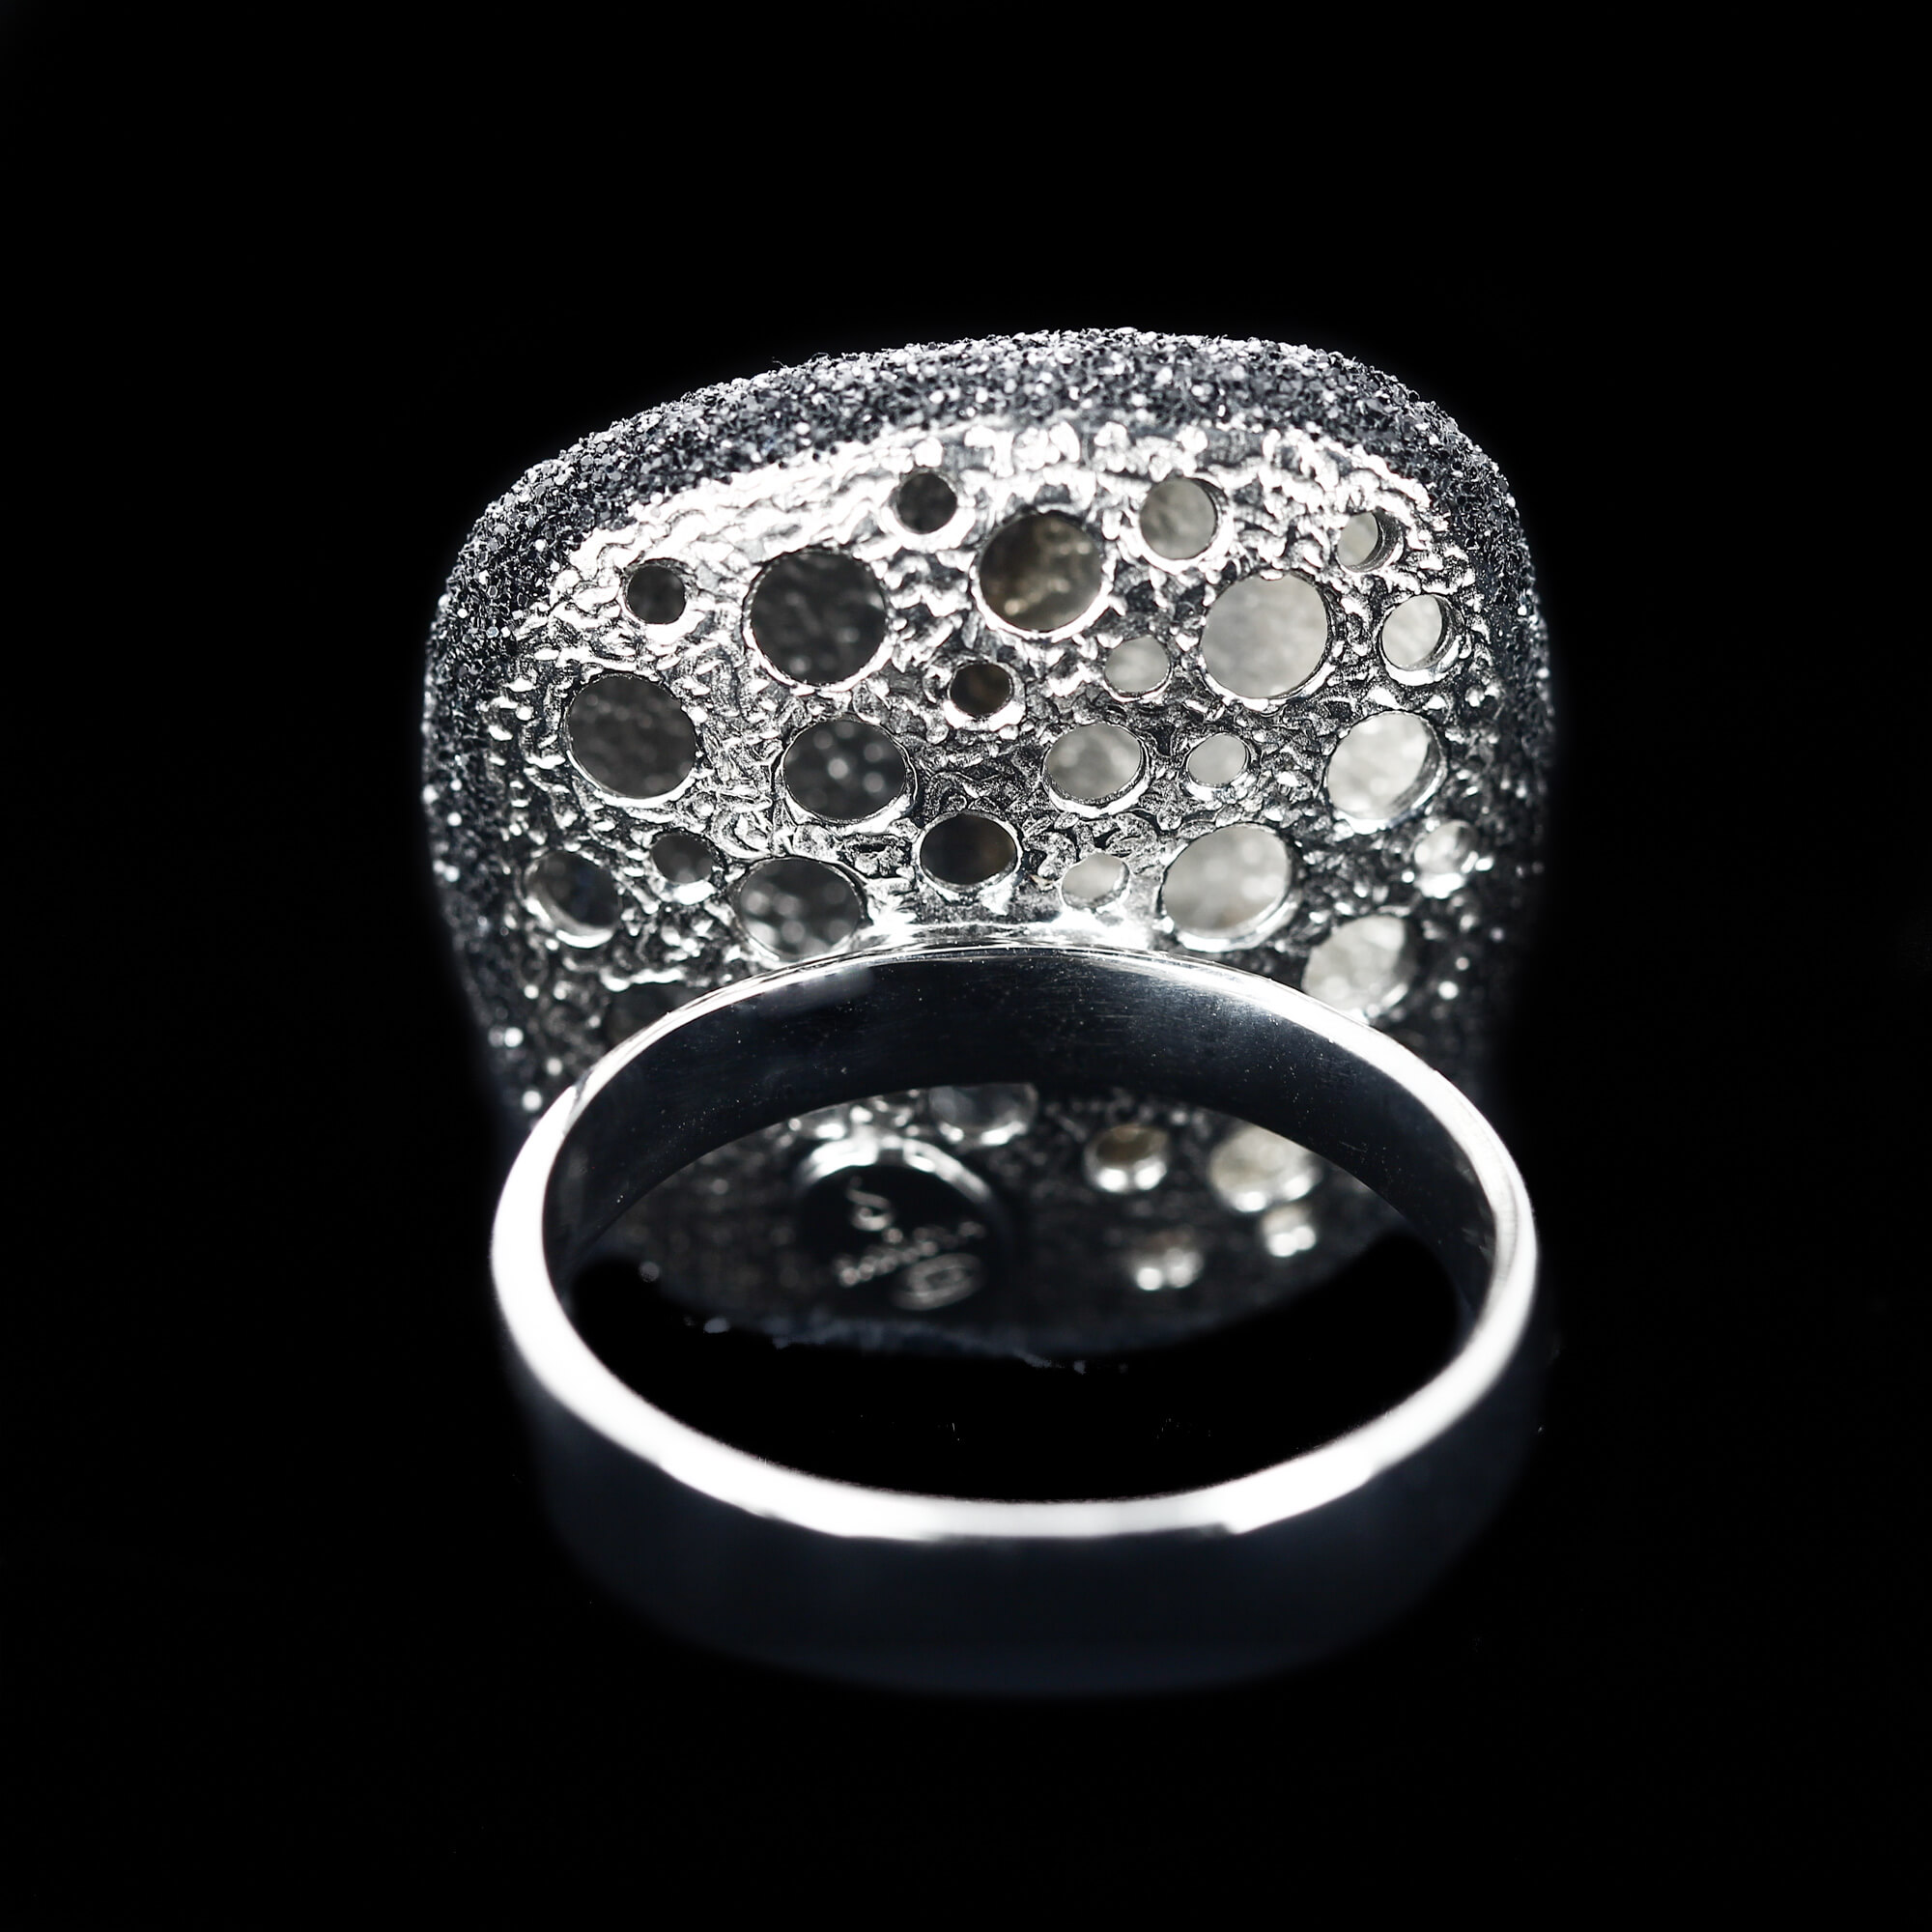 Beautiful black ring made of sterling silver